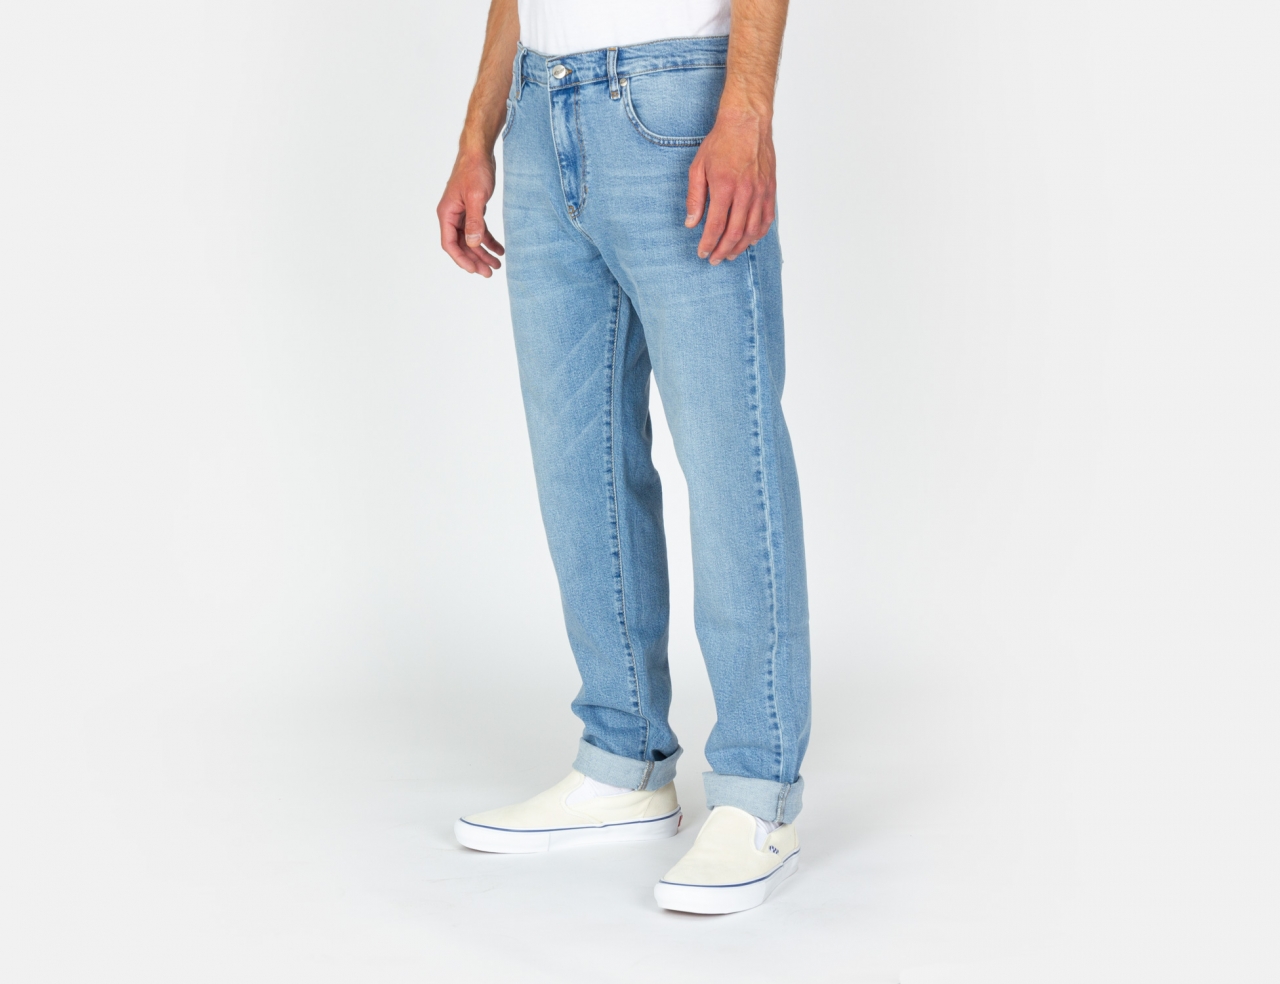 Reell Jeans Barfly Jeans - Light Blue Stone